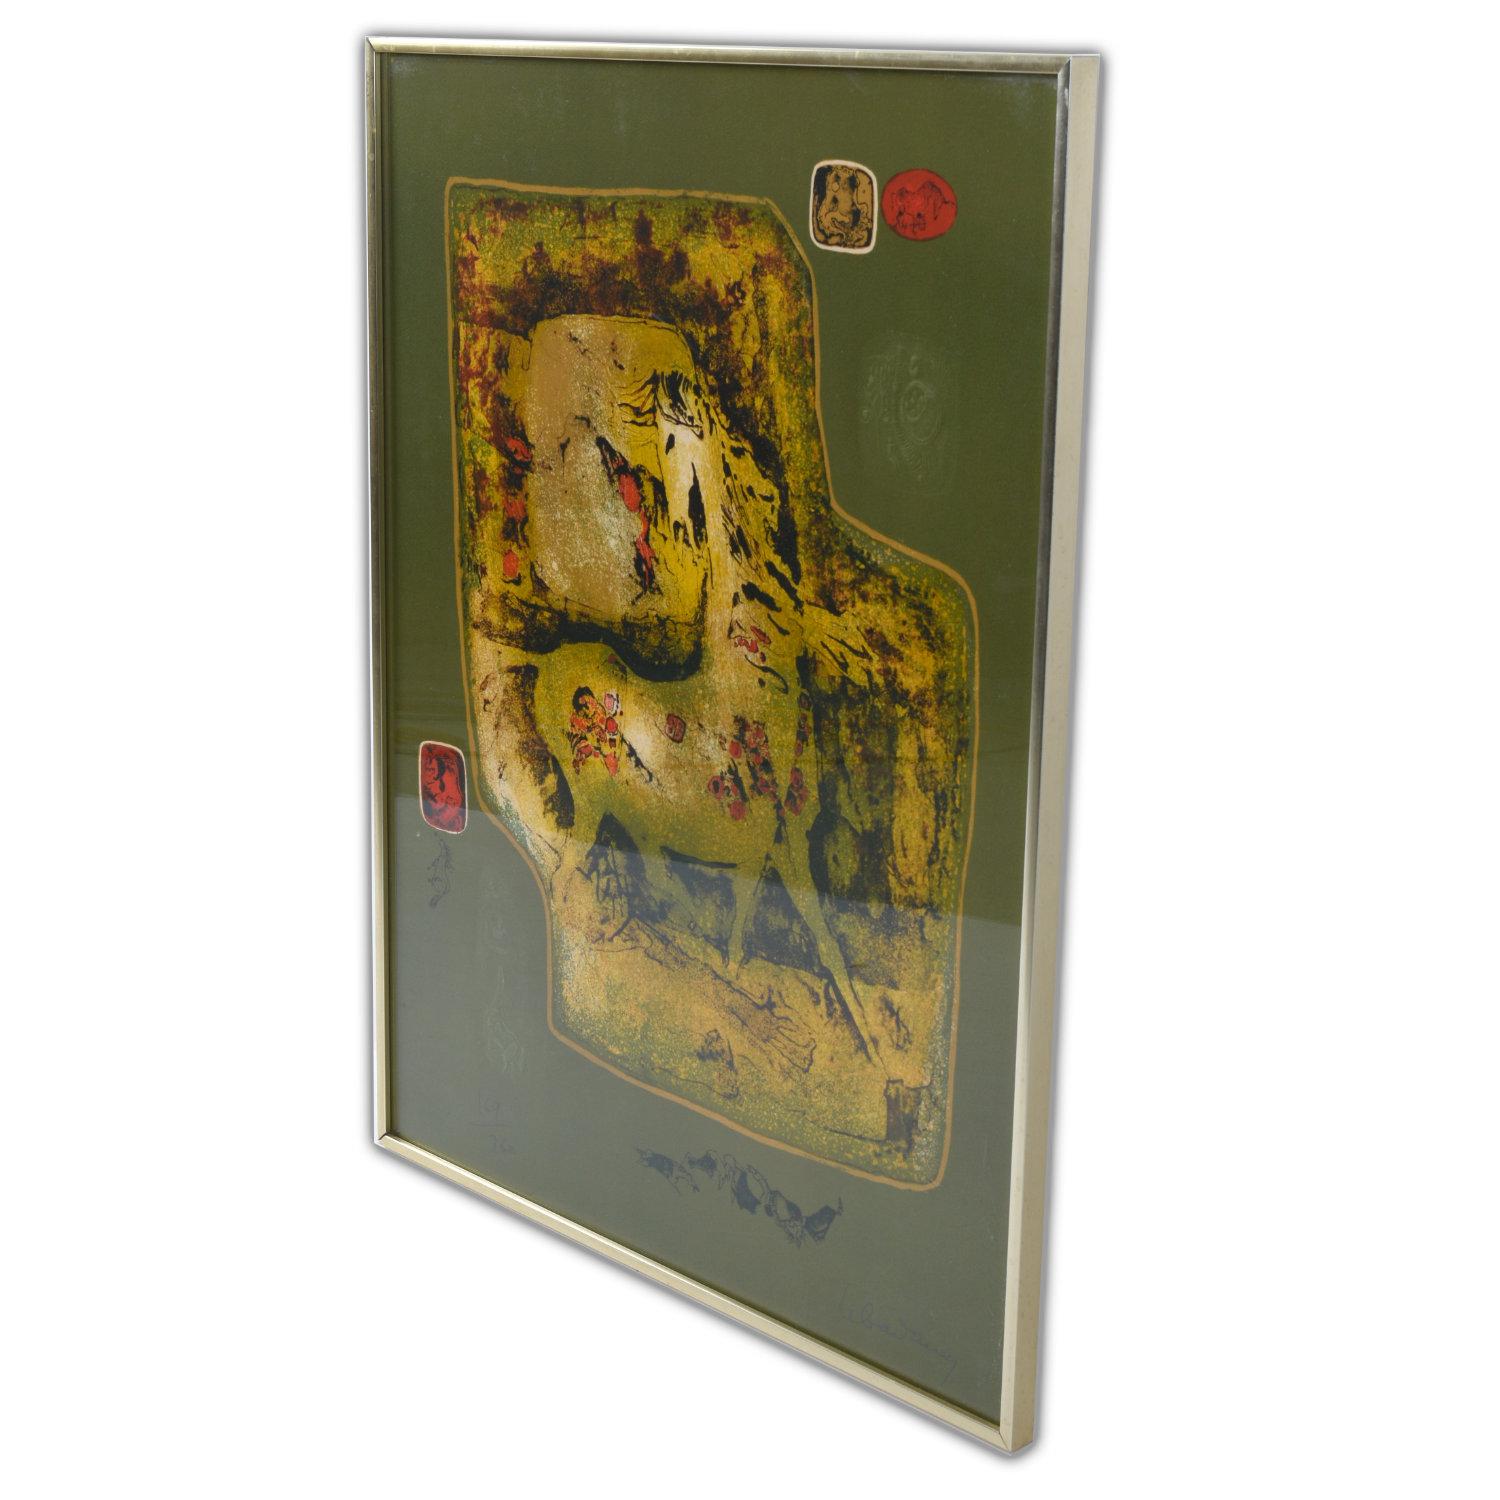 Pencil signed, limited edition Hoi Lebadang horse lithograph. The framed litho features Lebadang’s hallmark embossed medallions in the upper right and lower left corners. A single horse takes center stage in a field of golden yellow. Smaller